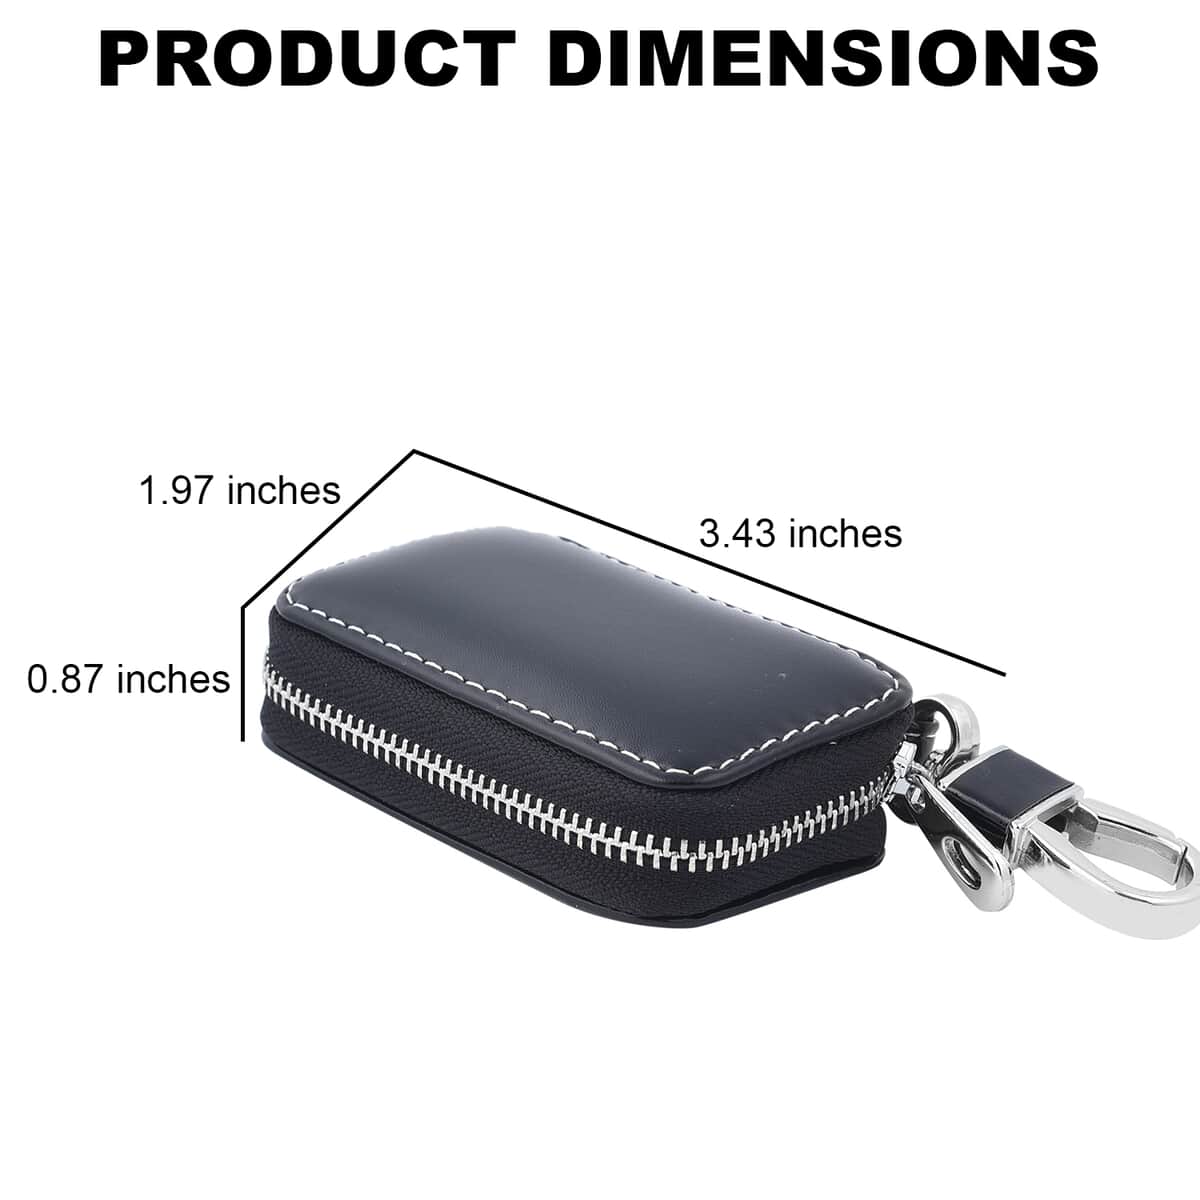 Black Square-Shaped Genuine Leather Bag With Swivel Metallic Snap Hoop, Zipper Closure, and Key-ring For Car Keys, Remote image number 2